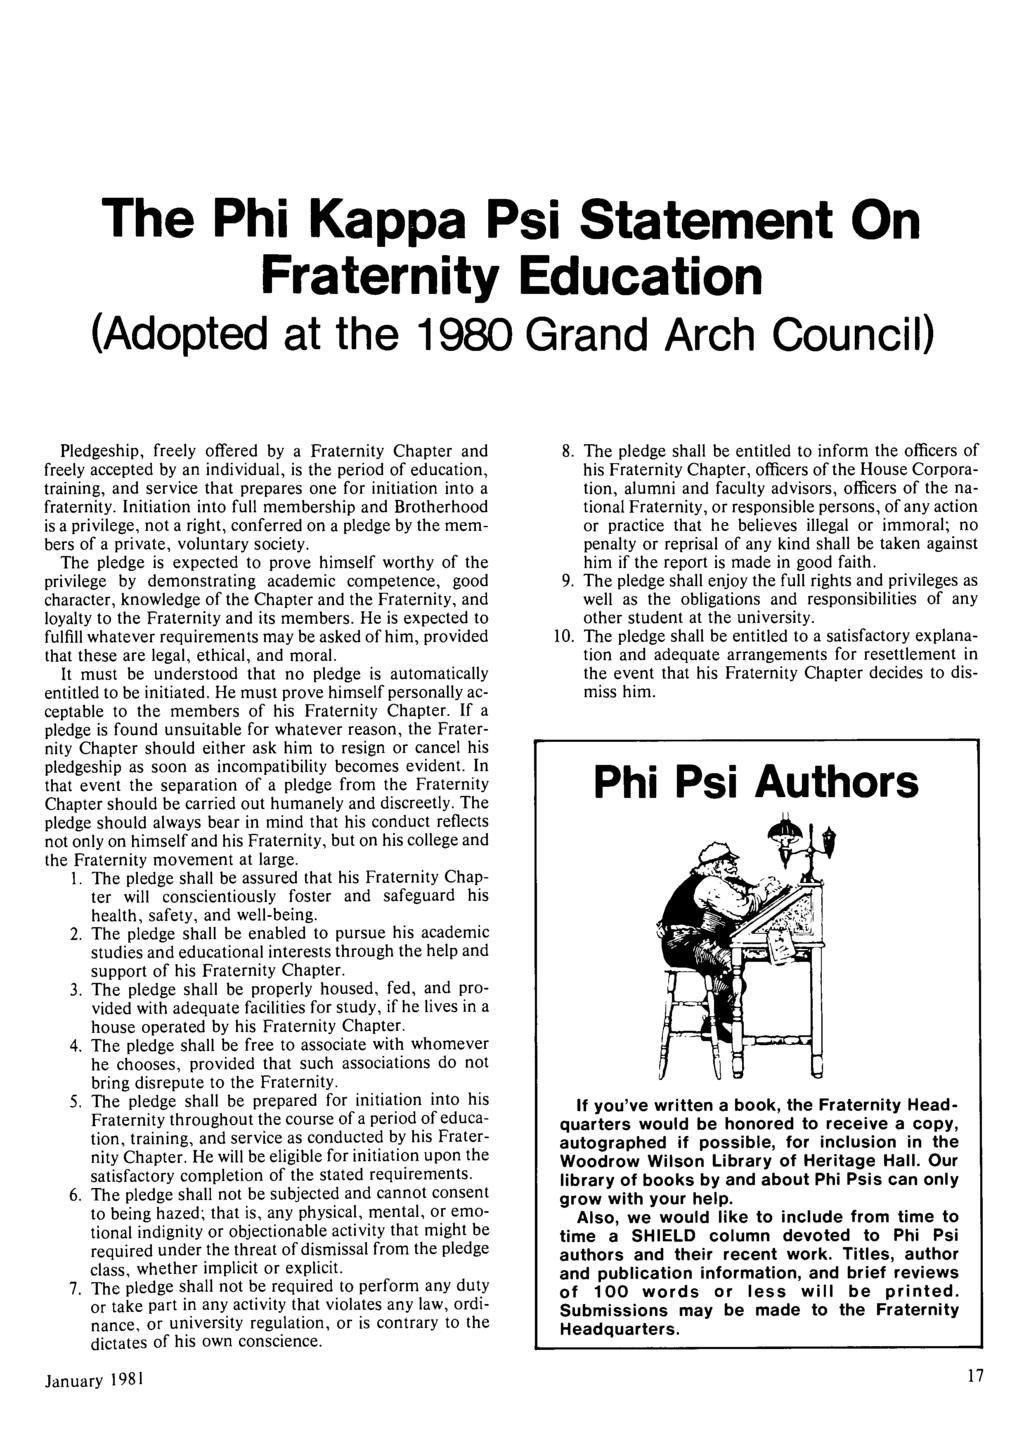 The Phi Kappa Psi Statement On Fraternity Education (Adopted at the 1980 Grand Arch Council) Pledgeship, freely offered by a Fraternity Chapter and freely accepted by an individual, is the period of